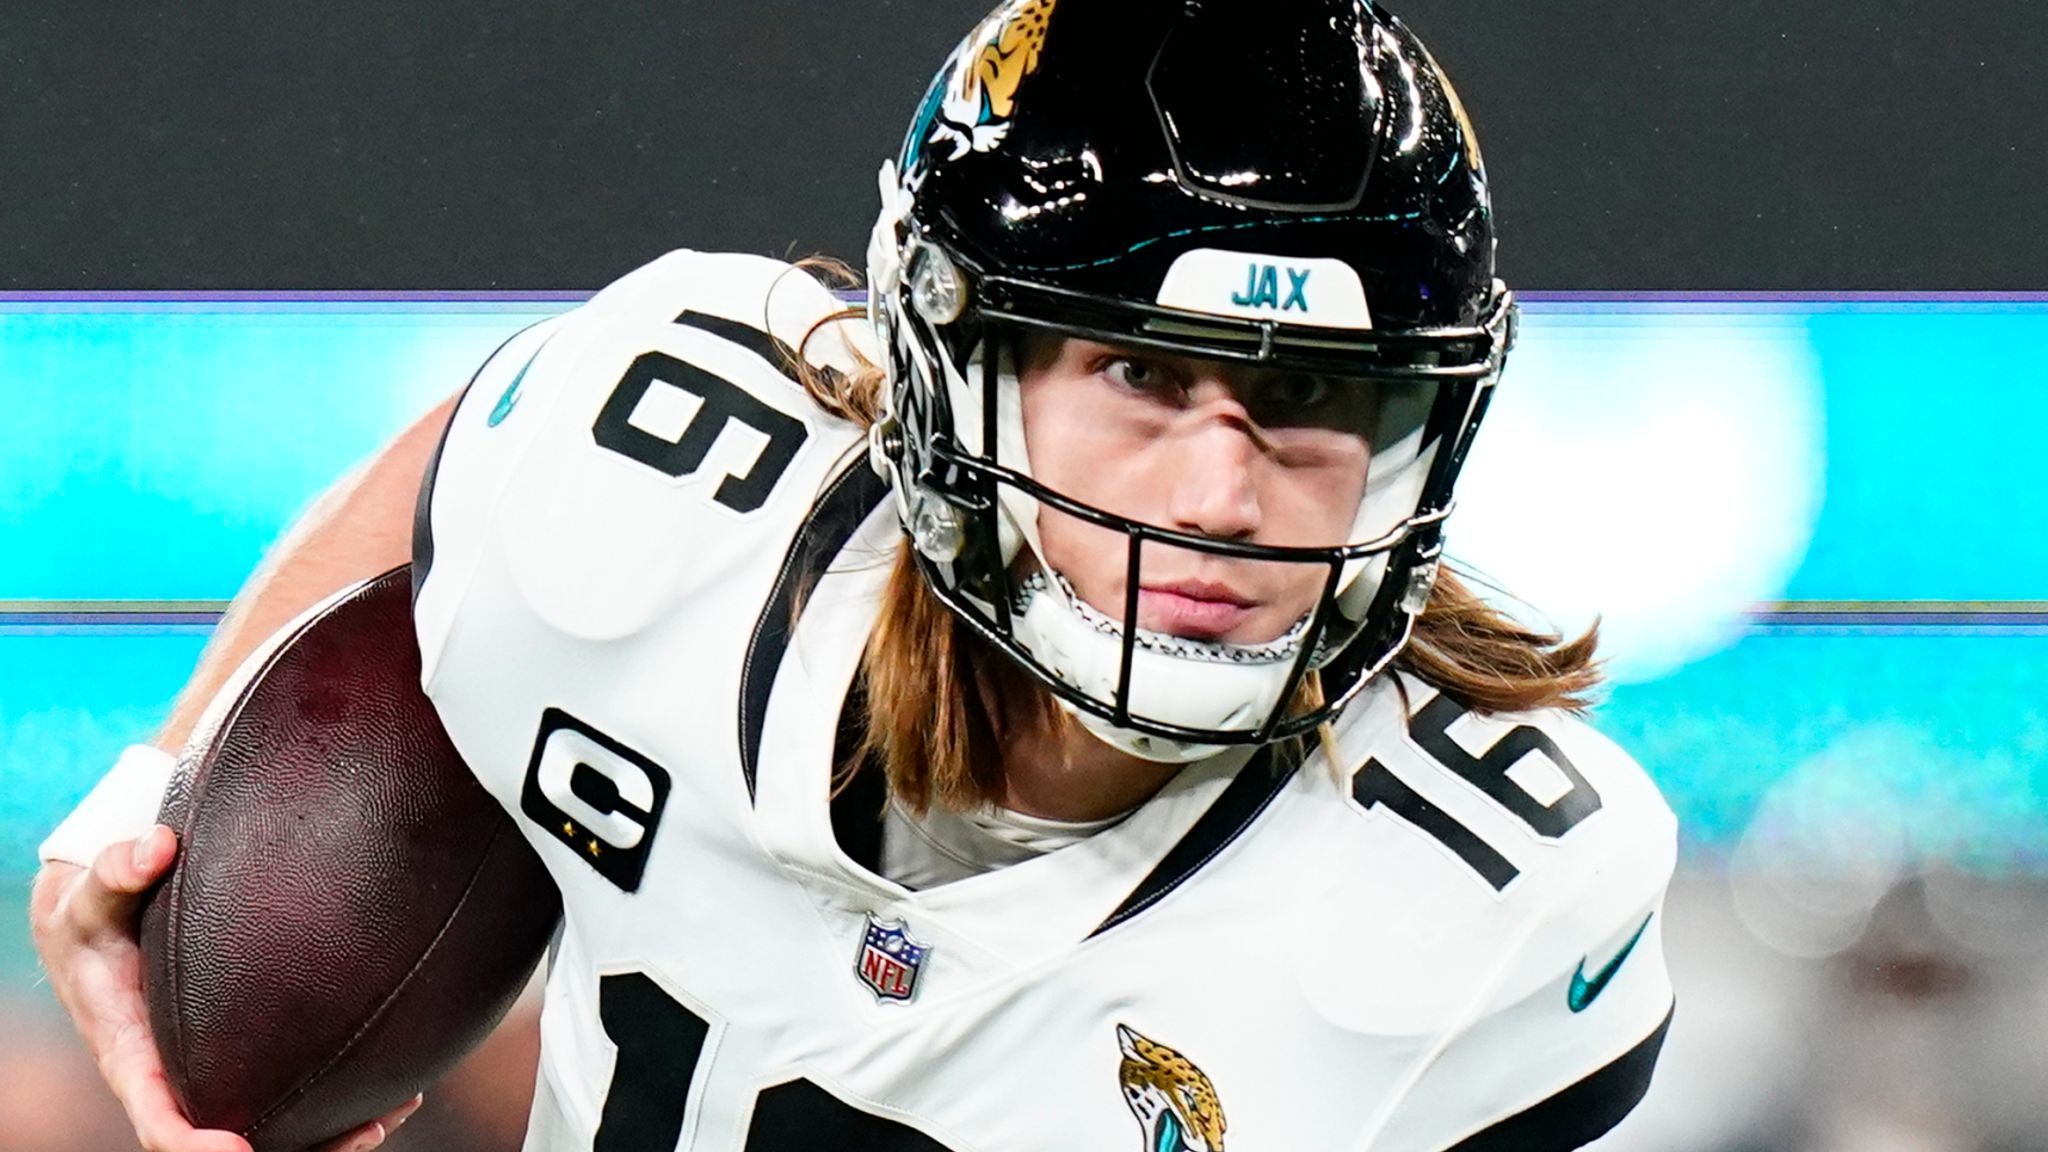 Who is Jacksonville Jaguars quarterback Trevor Lawrence and how tall is he?